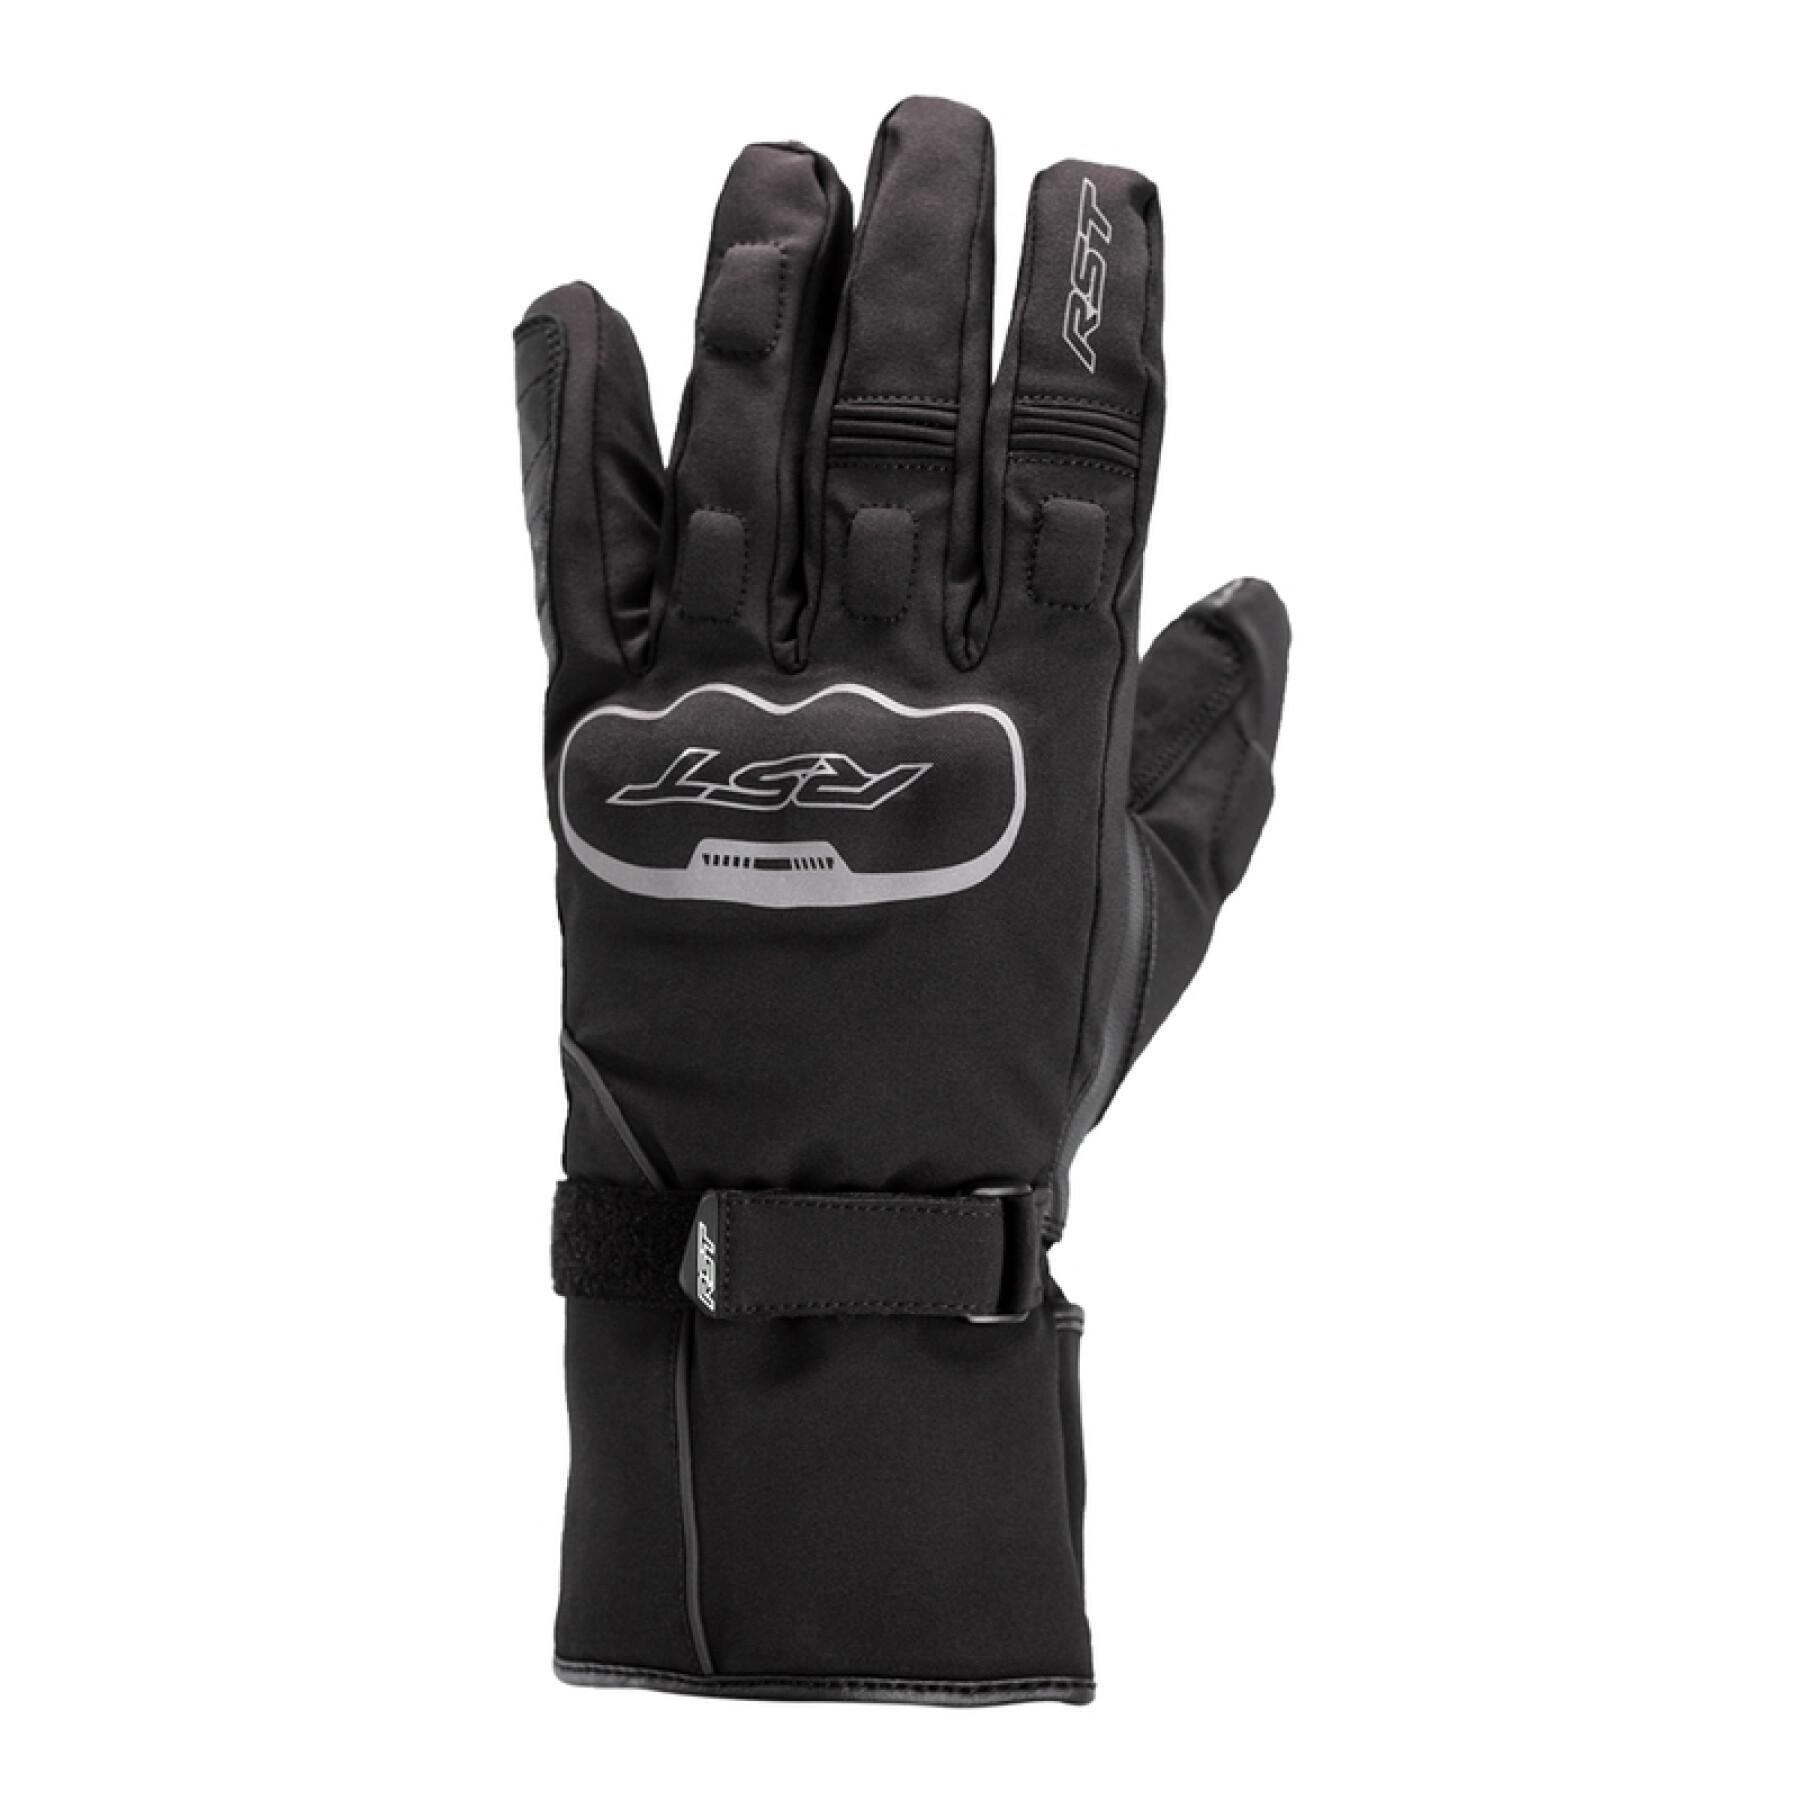 RST Stunt III 3 CE Mid Length Leather Motorcycle Gloves Black/White 